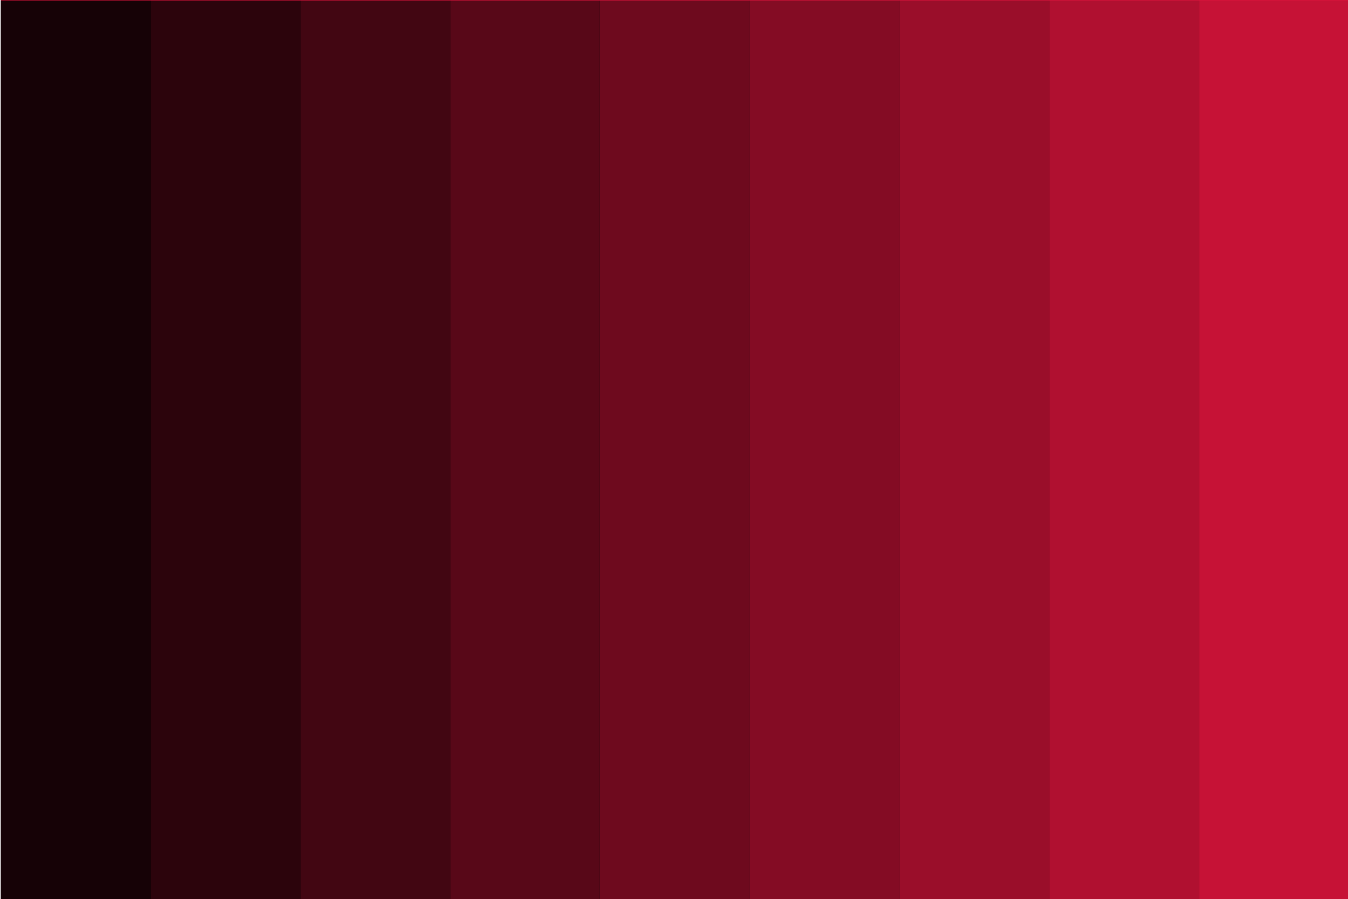 100+ Shades of Red Color (Names, RGB, & CMYK Codes) CreativeBooster